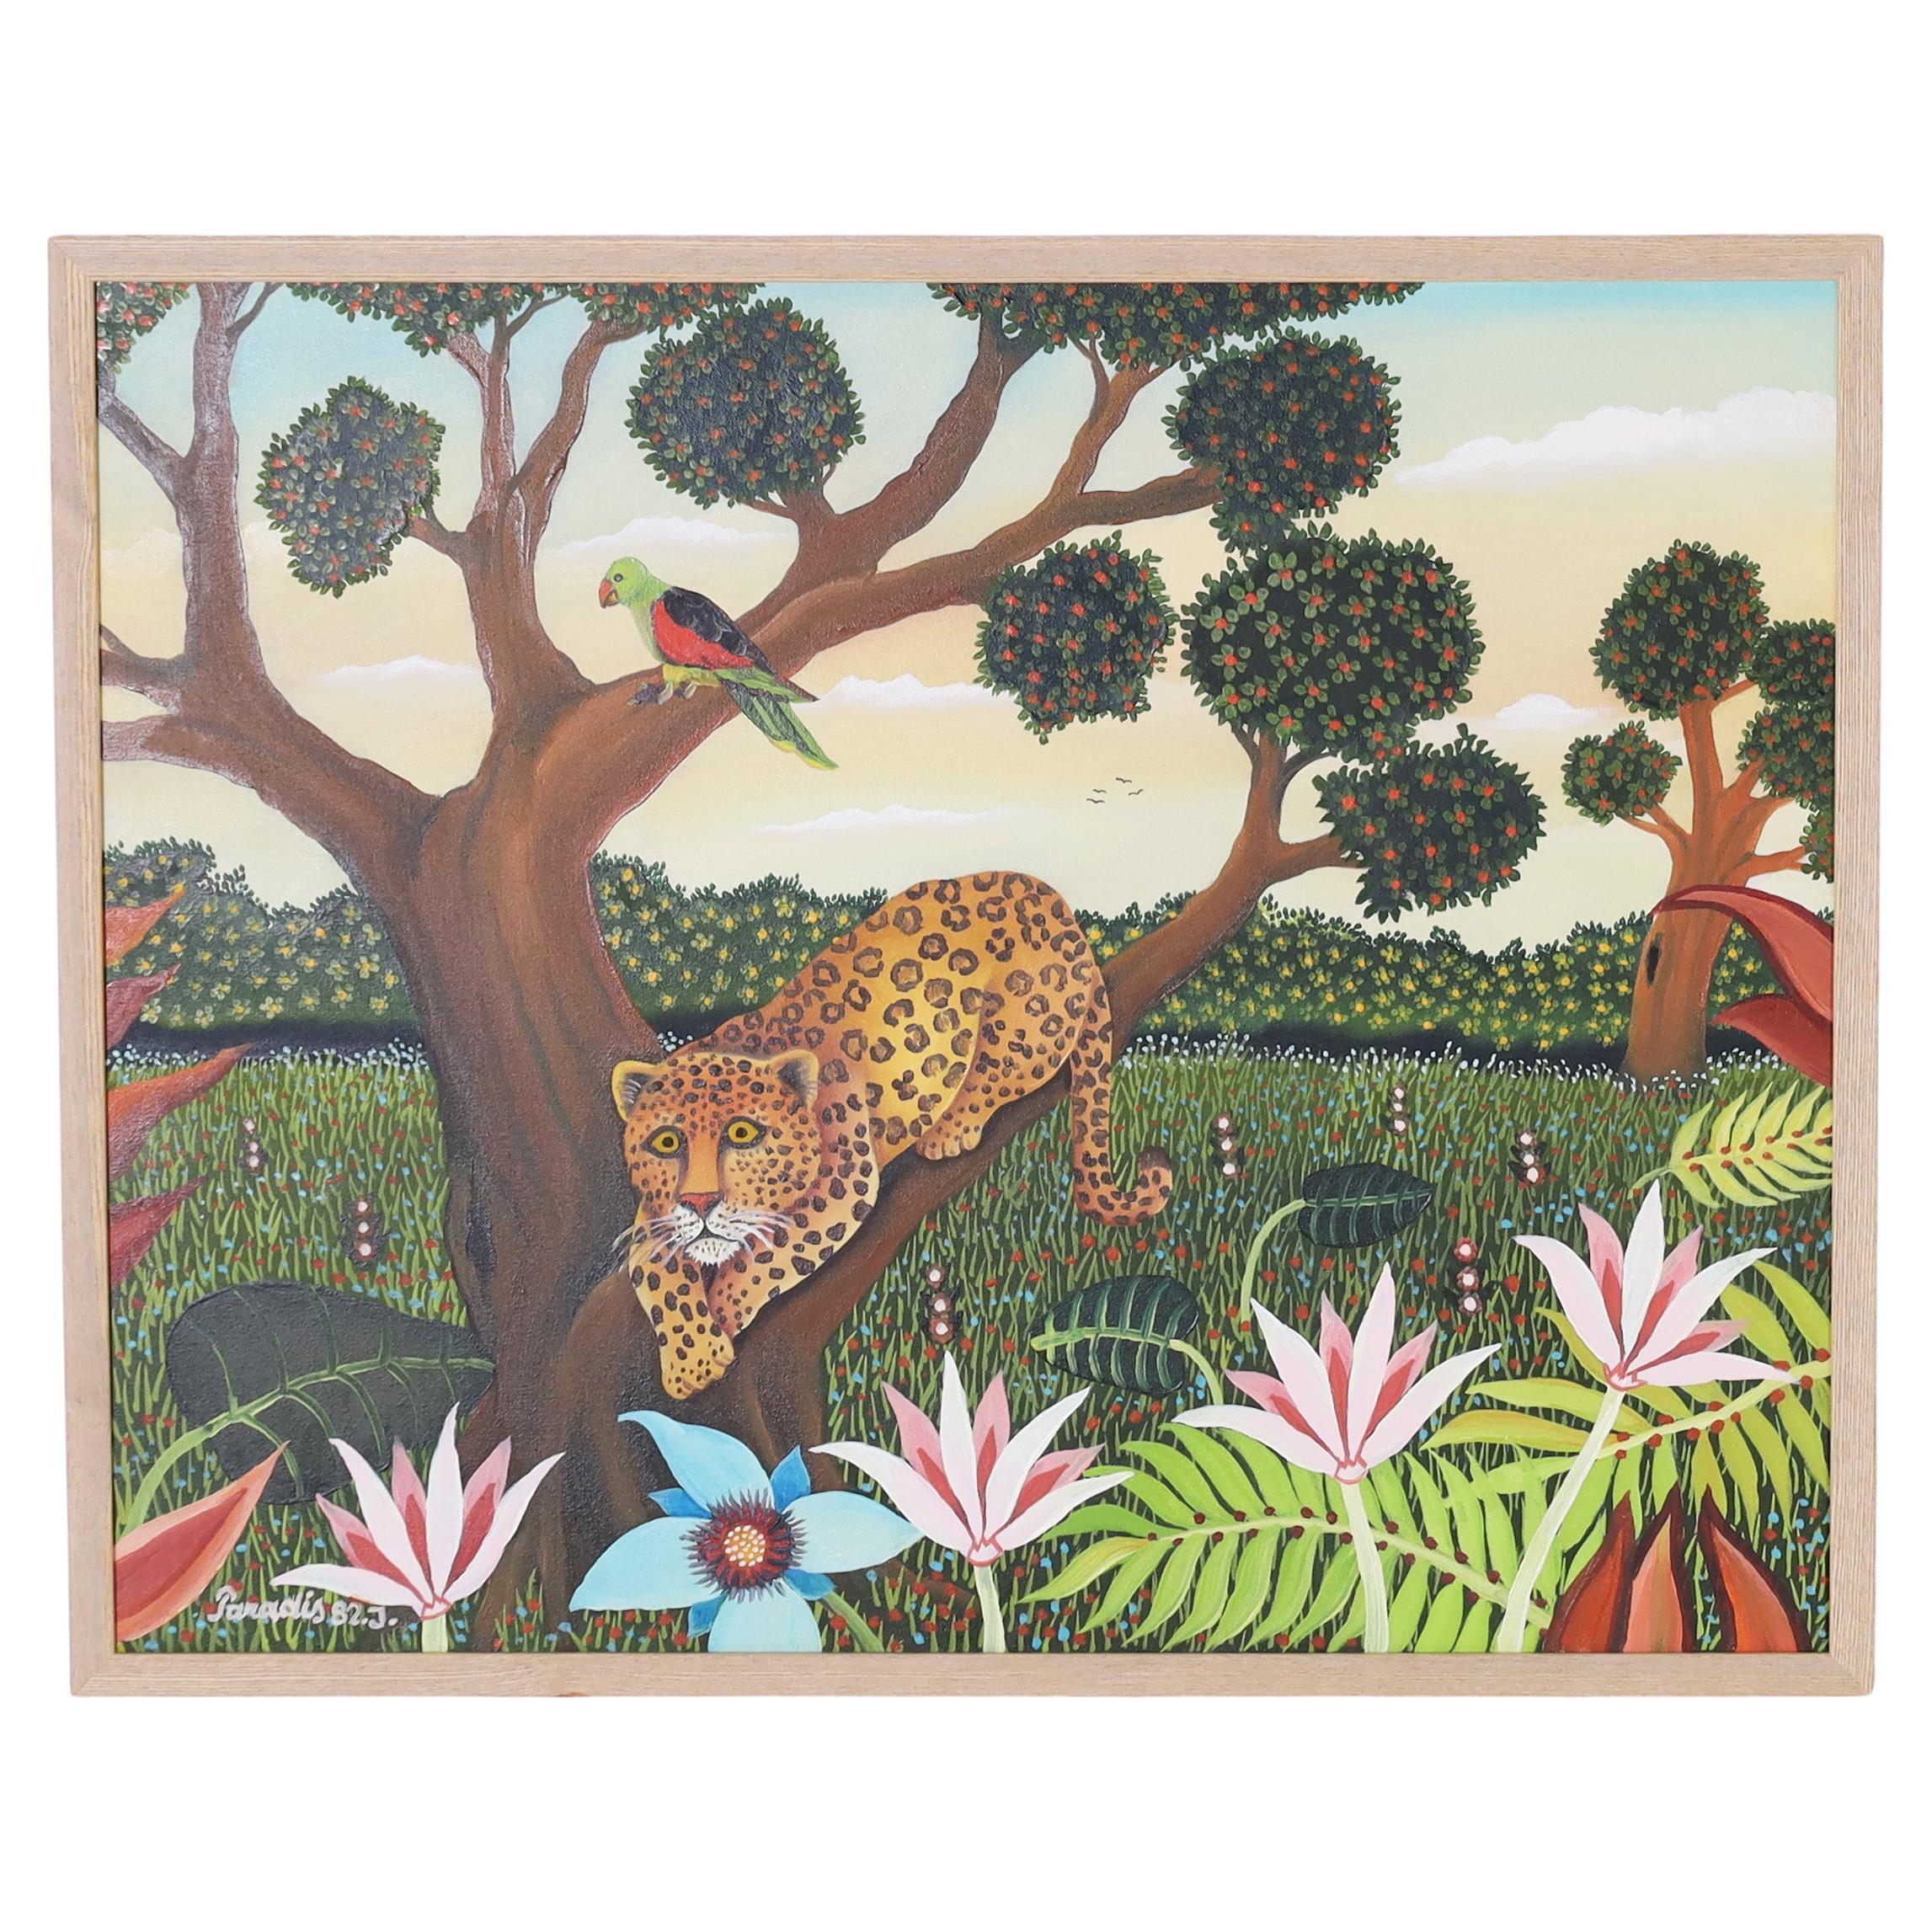 Vintage Branko Paradis Painting on Canvas of a Leopard in a Tree